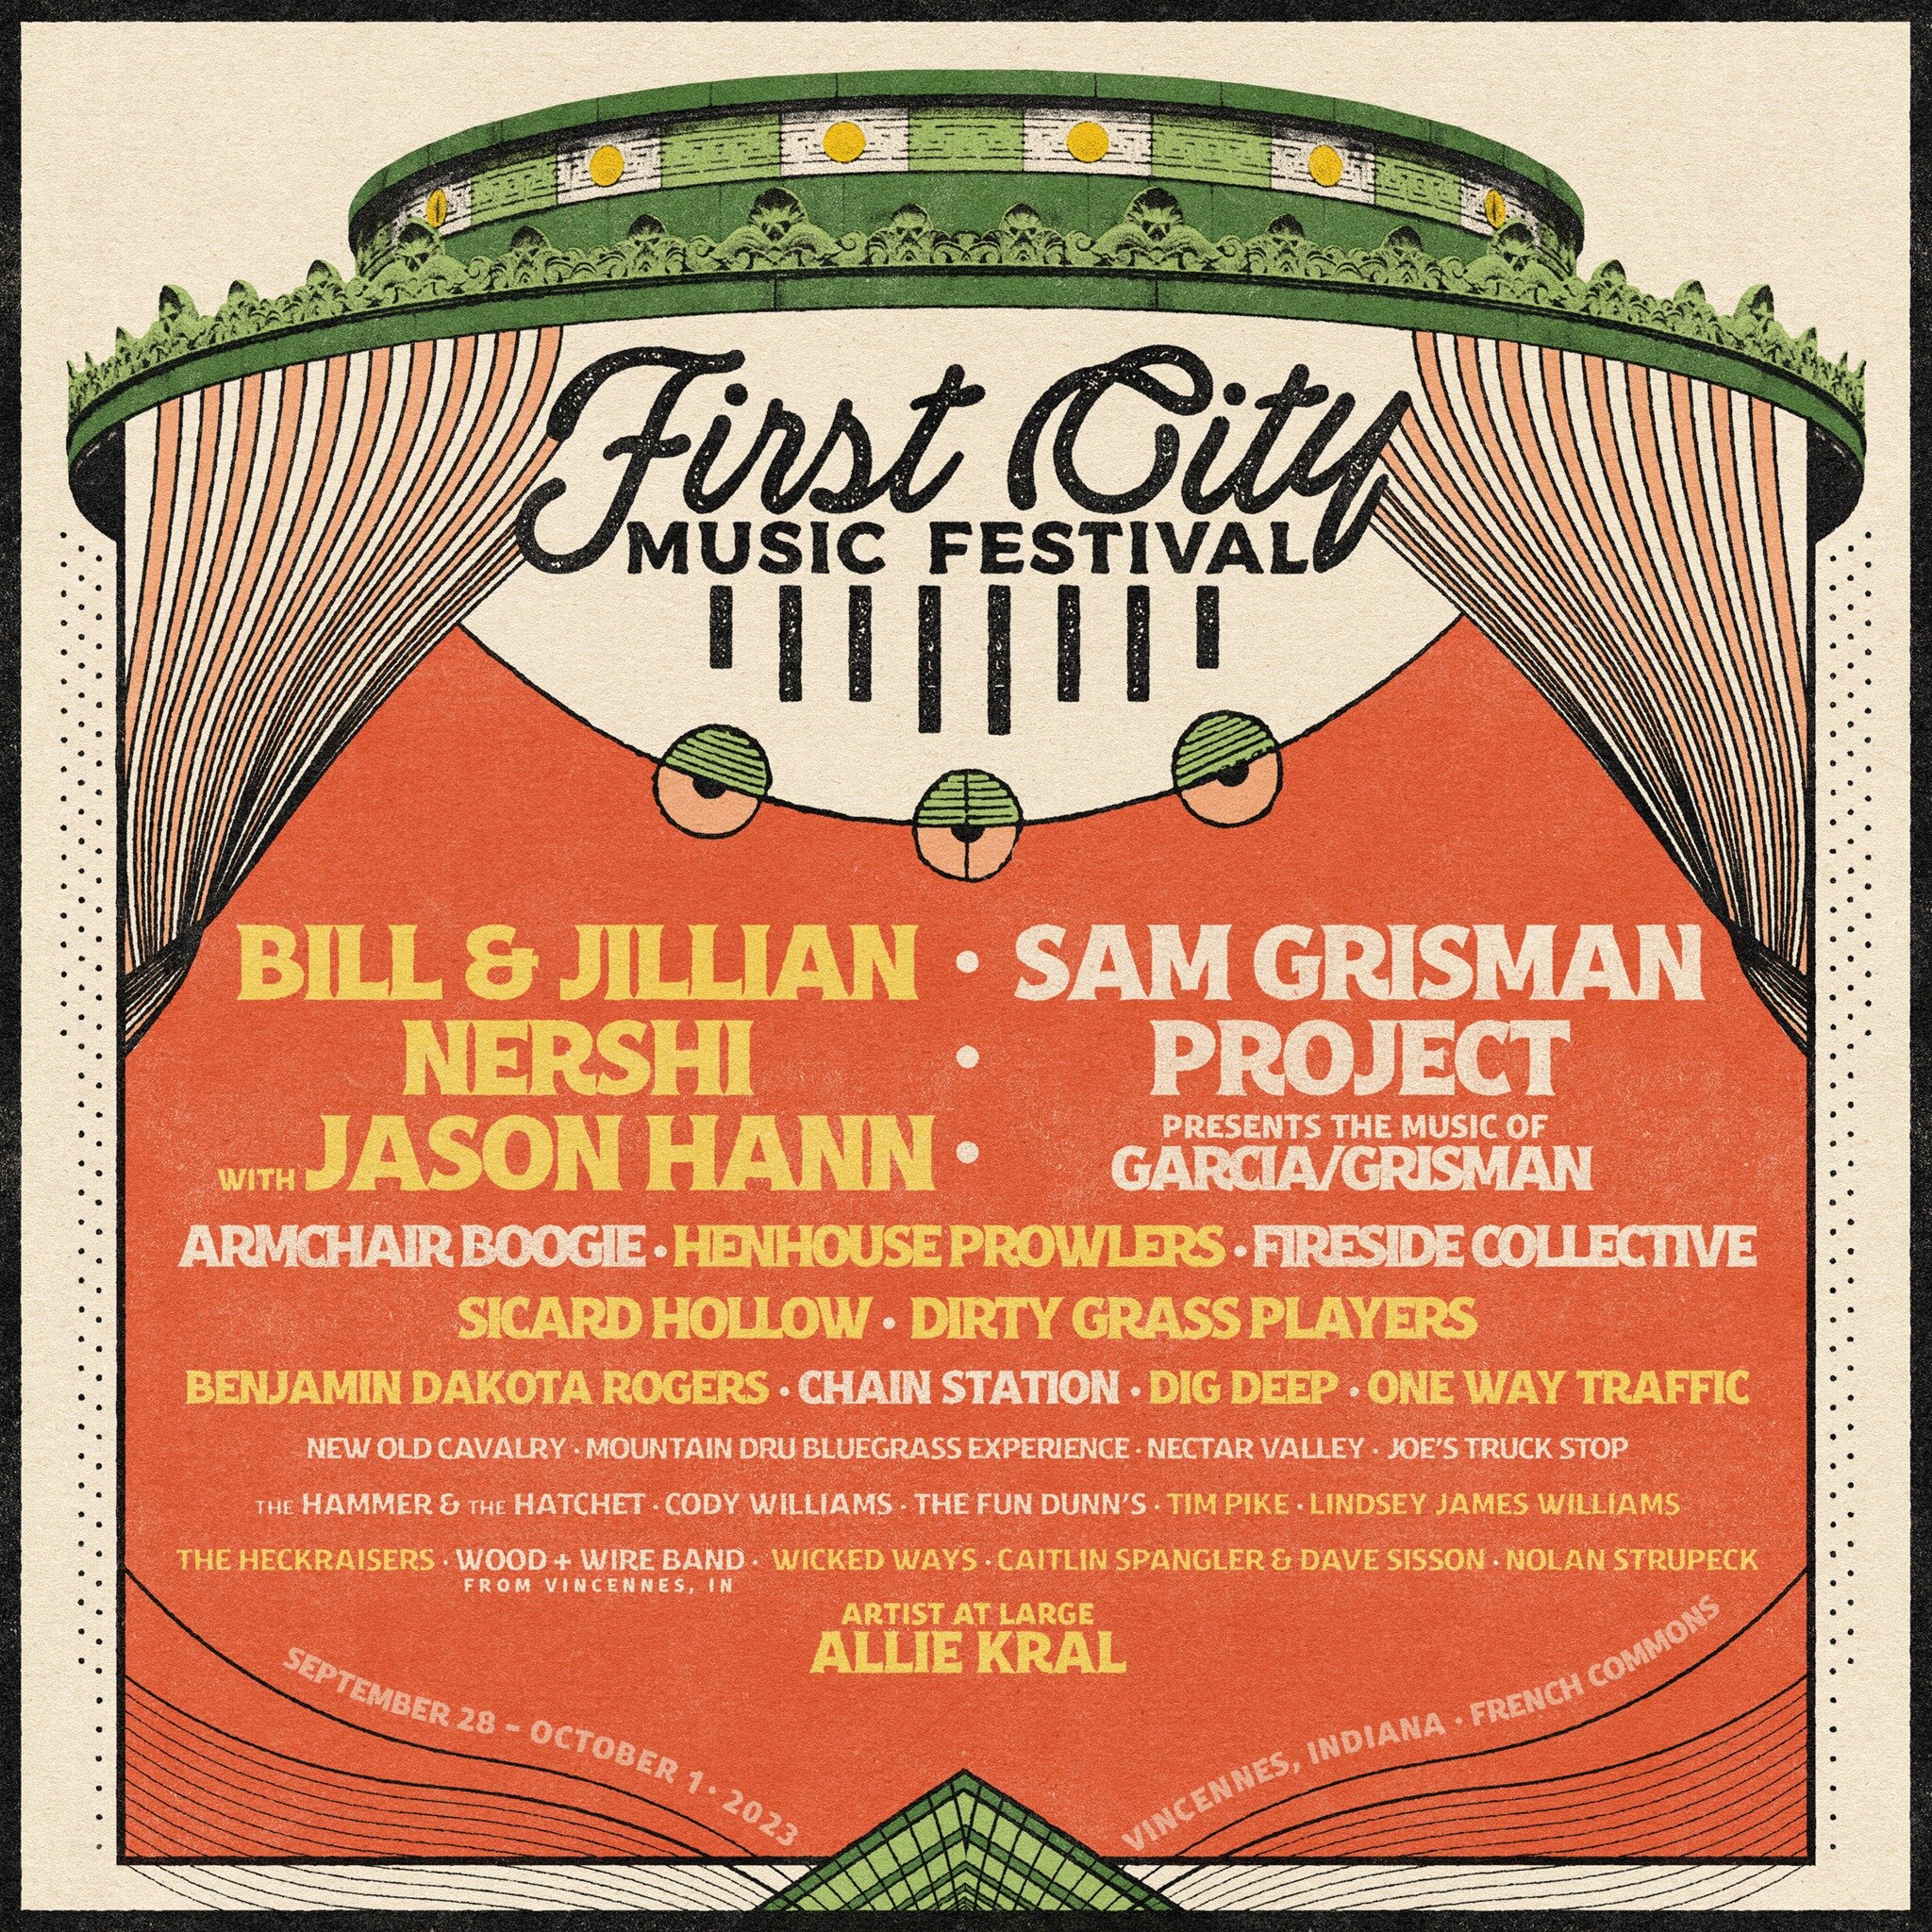 Stoked to announce that we'll be at @firstcitymusicfest in Vincennes, IN, this fall, September 28th through October 1st. Tix and more info on the website!

#FirstCityMusicFest #bluegrassfestival #campingfestival #livemusic #jamgrass #americanamusic #